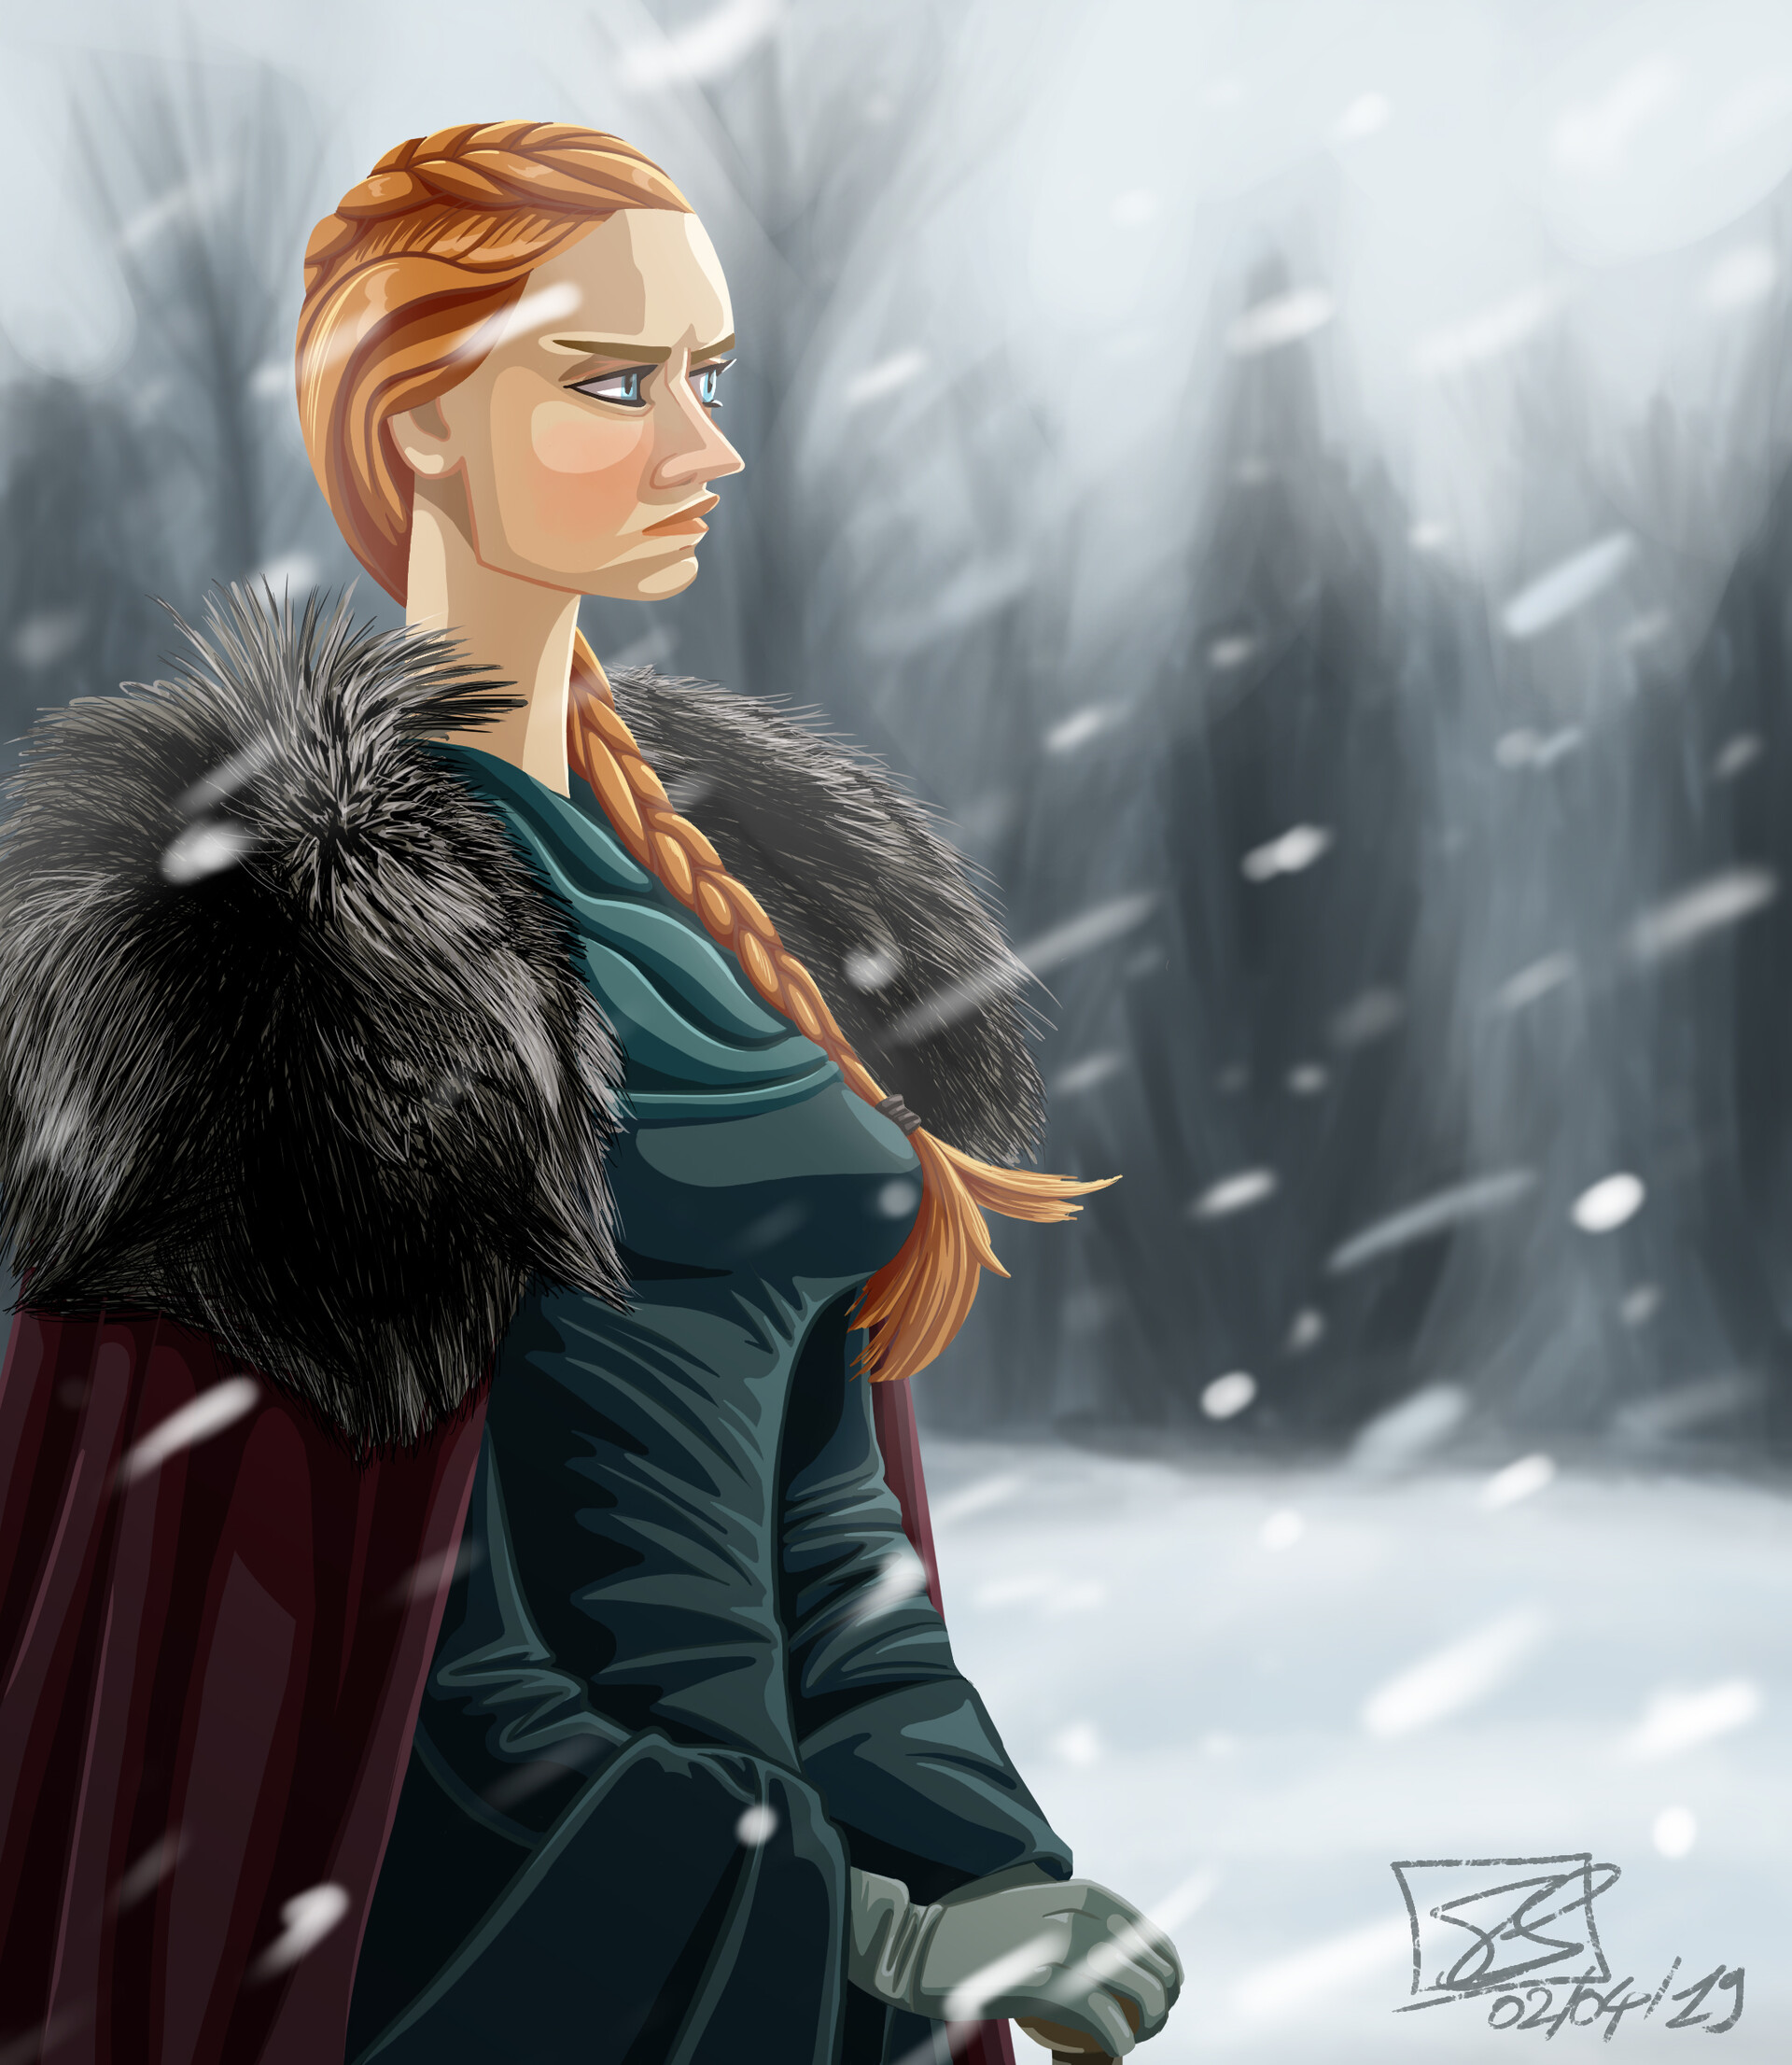 This is a fan art of Sansa Stark I've made for fun and for practice wi...